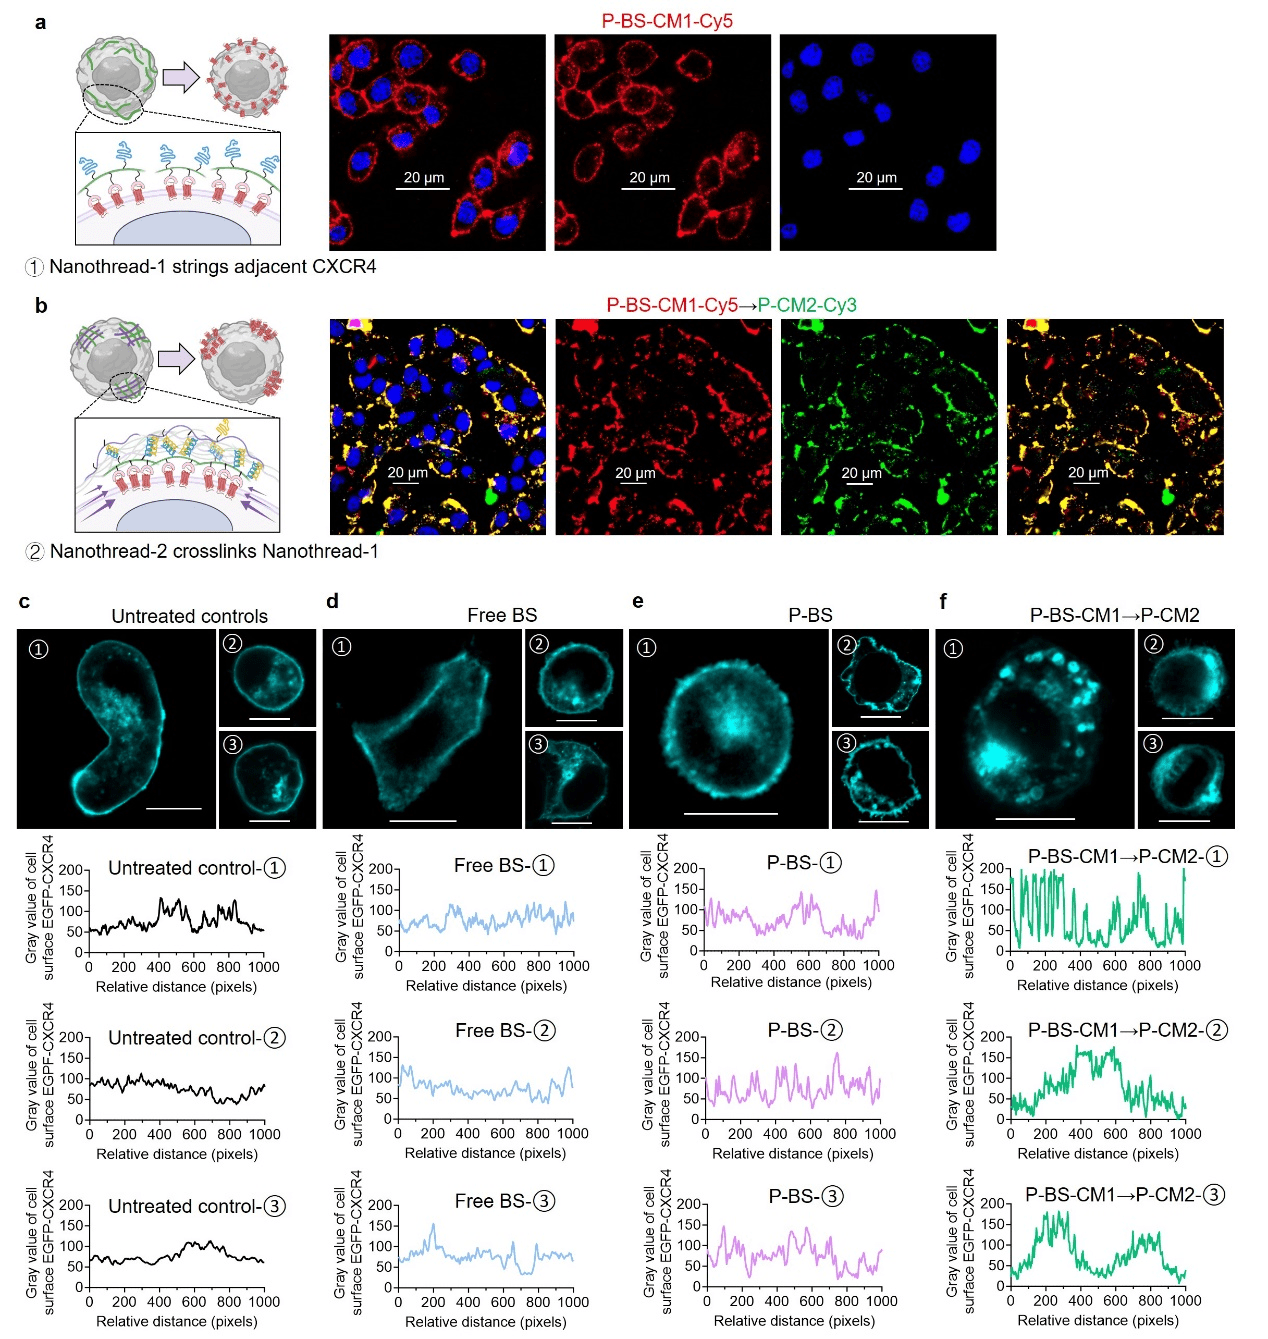 Network cross-linking strategy inducing CXCR4 clustering on the cell surface